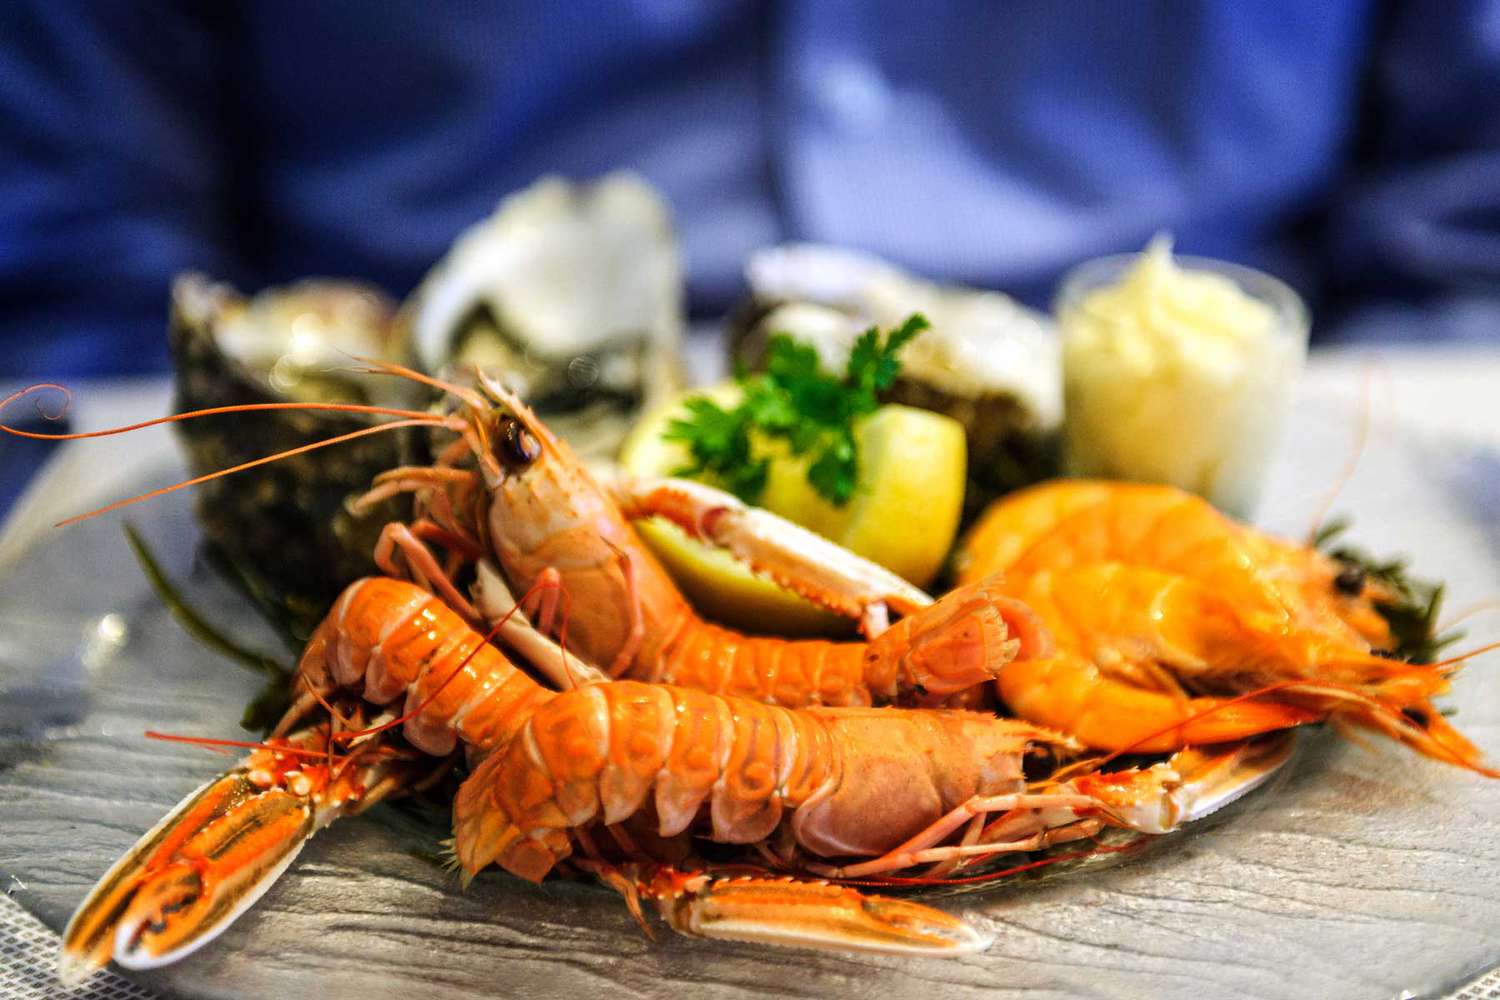 Best Seafood Restaurants In America For Fish, Lobster And Crab